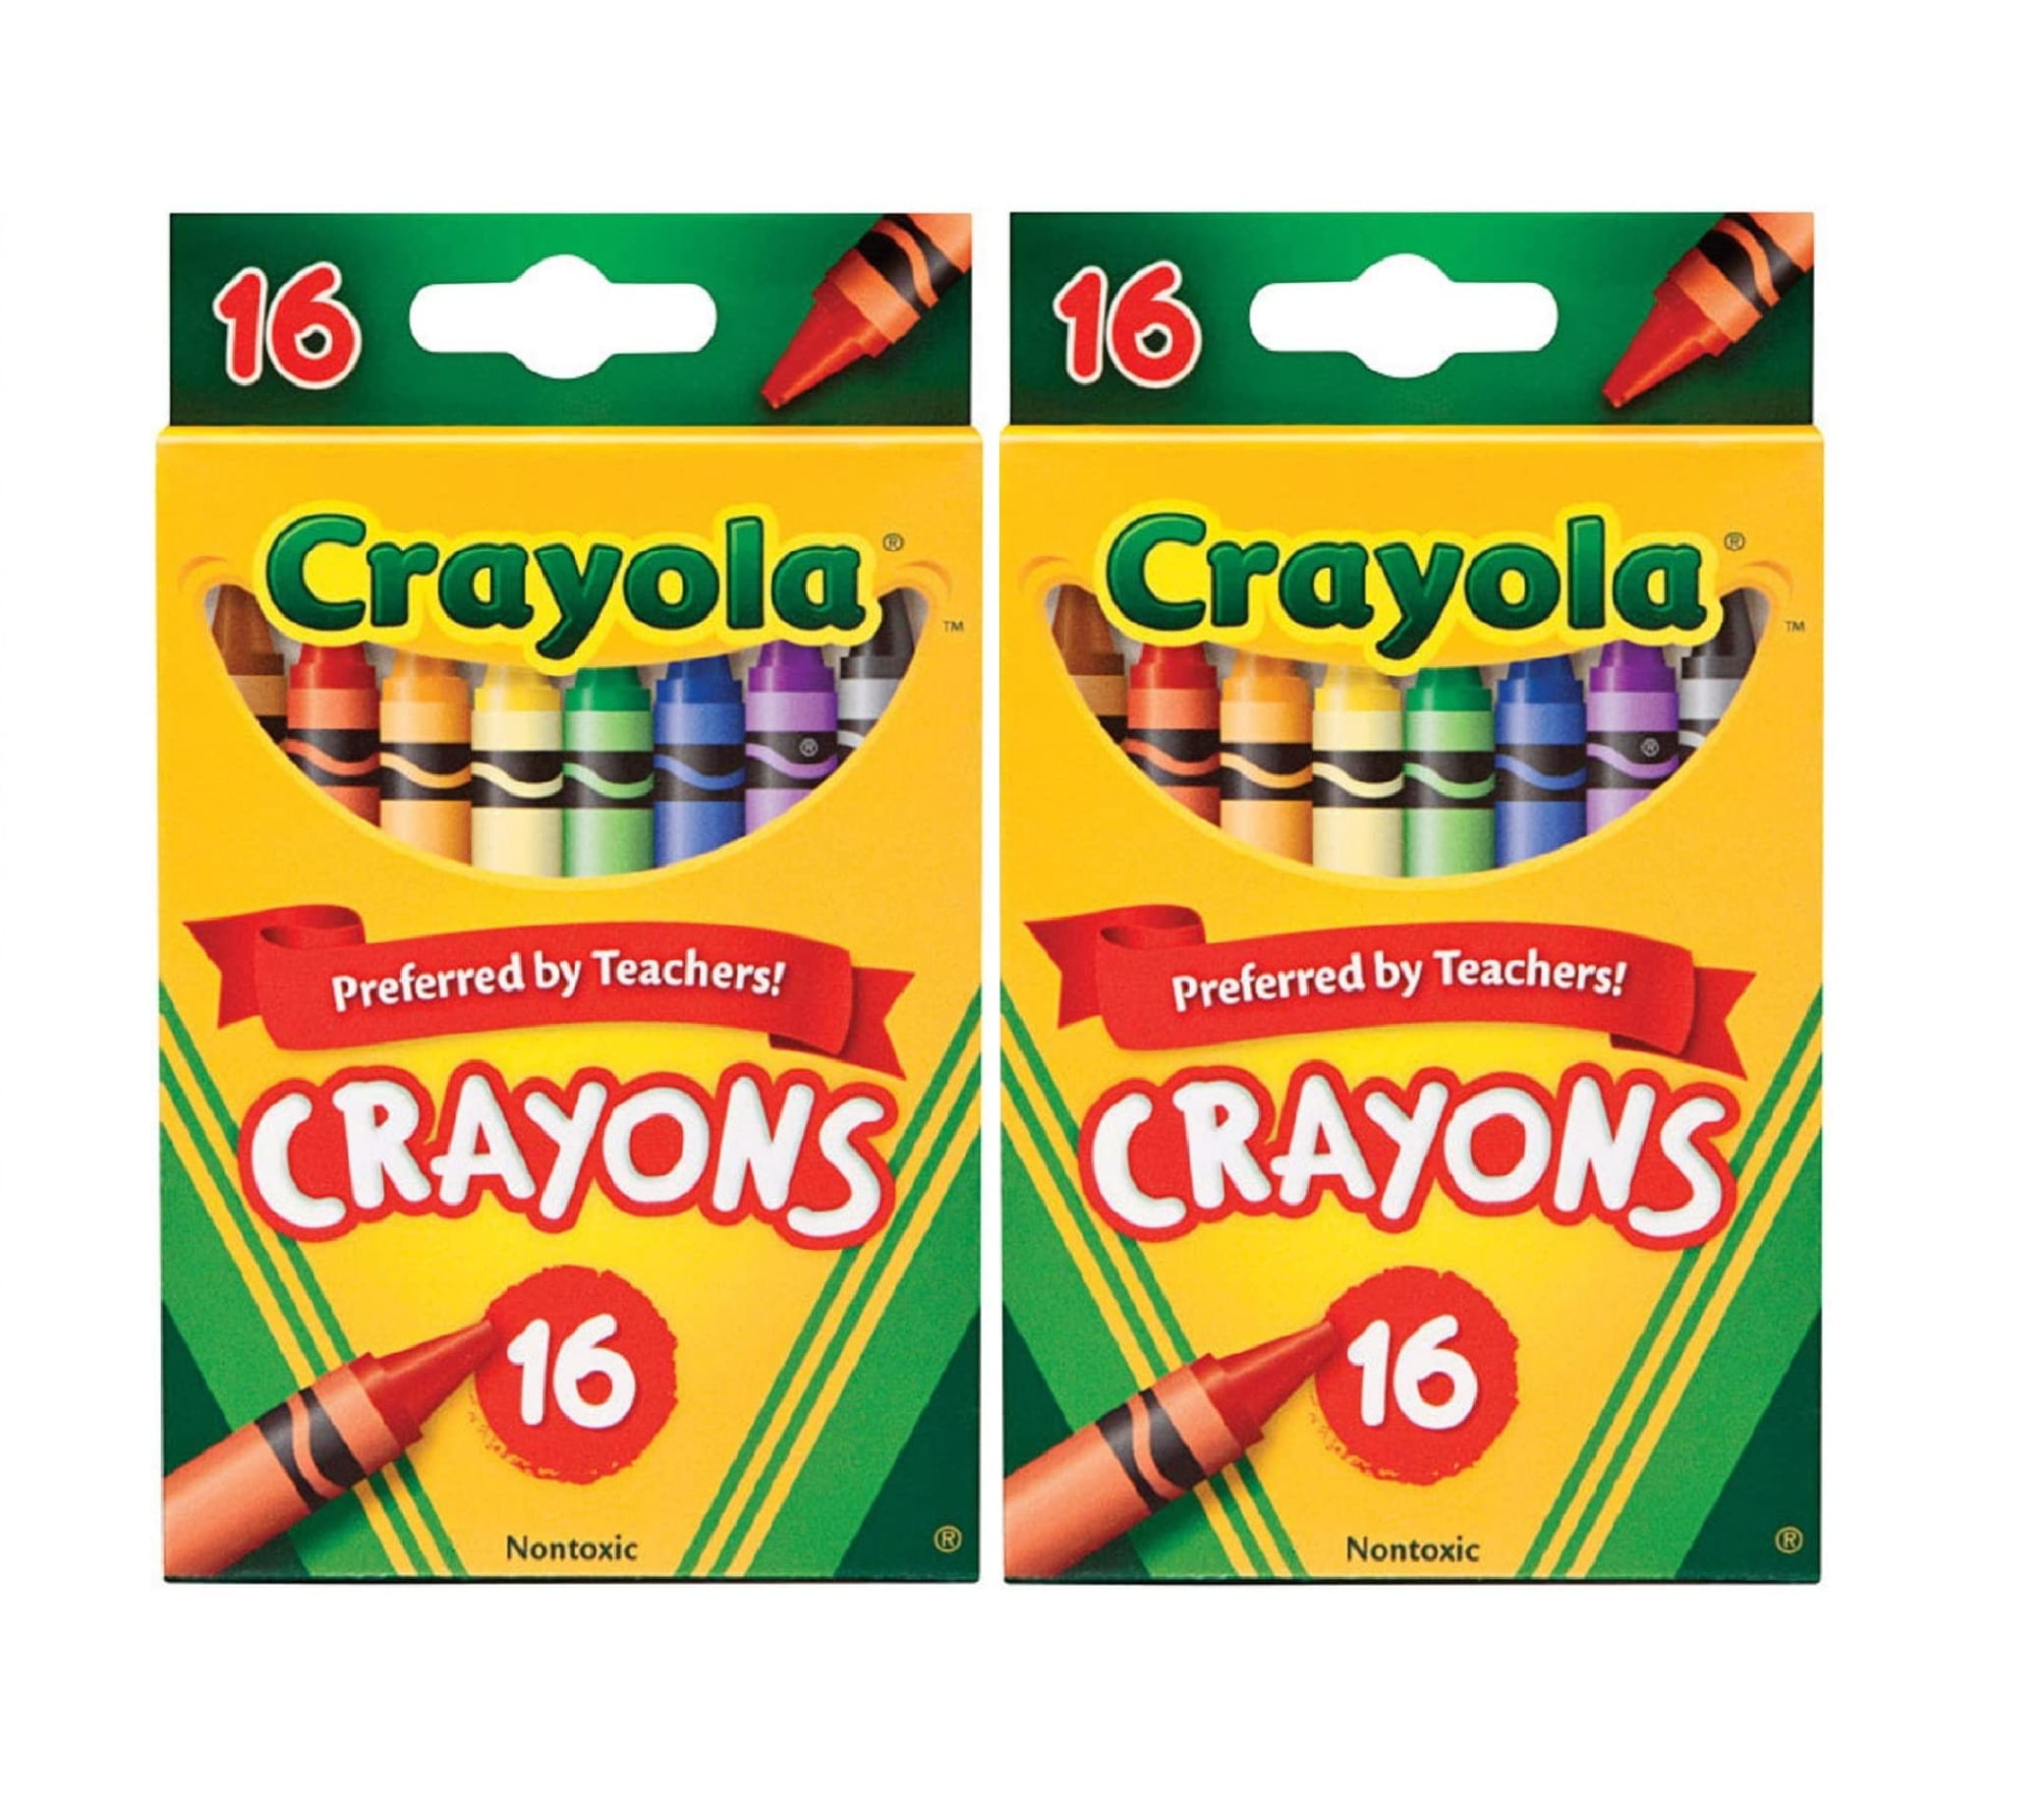 Crayola Washable Crayons - 64 Count (2 Boxes), Bulk Crayons for Kids,  Crayon Set, Holiday Gift for Kids, Stocking Stuffer, Ages 3+ [  Exclusive]